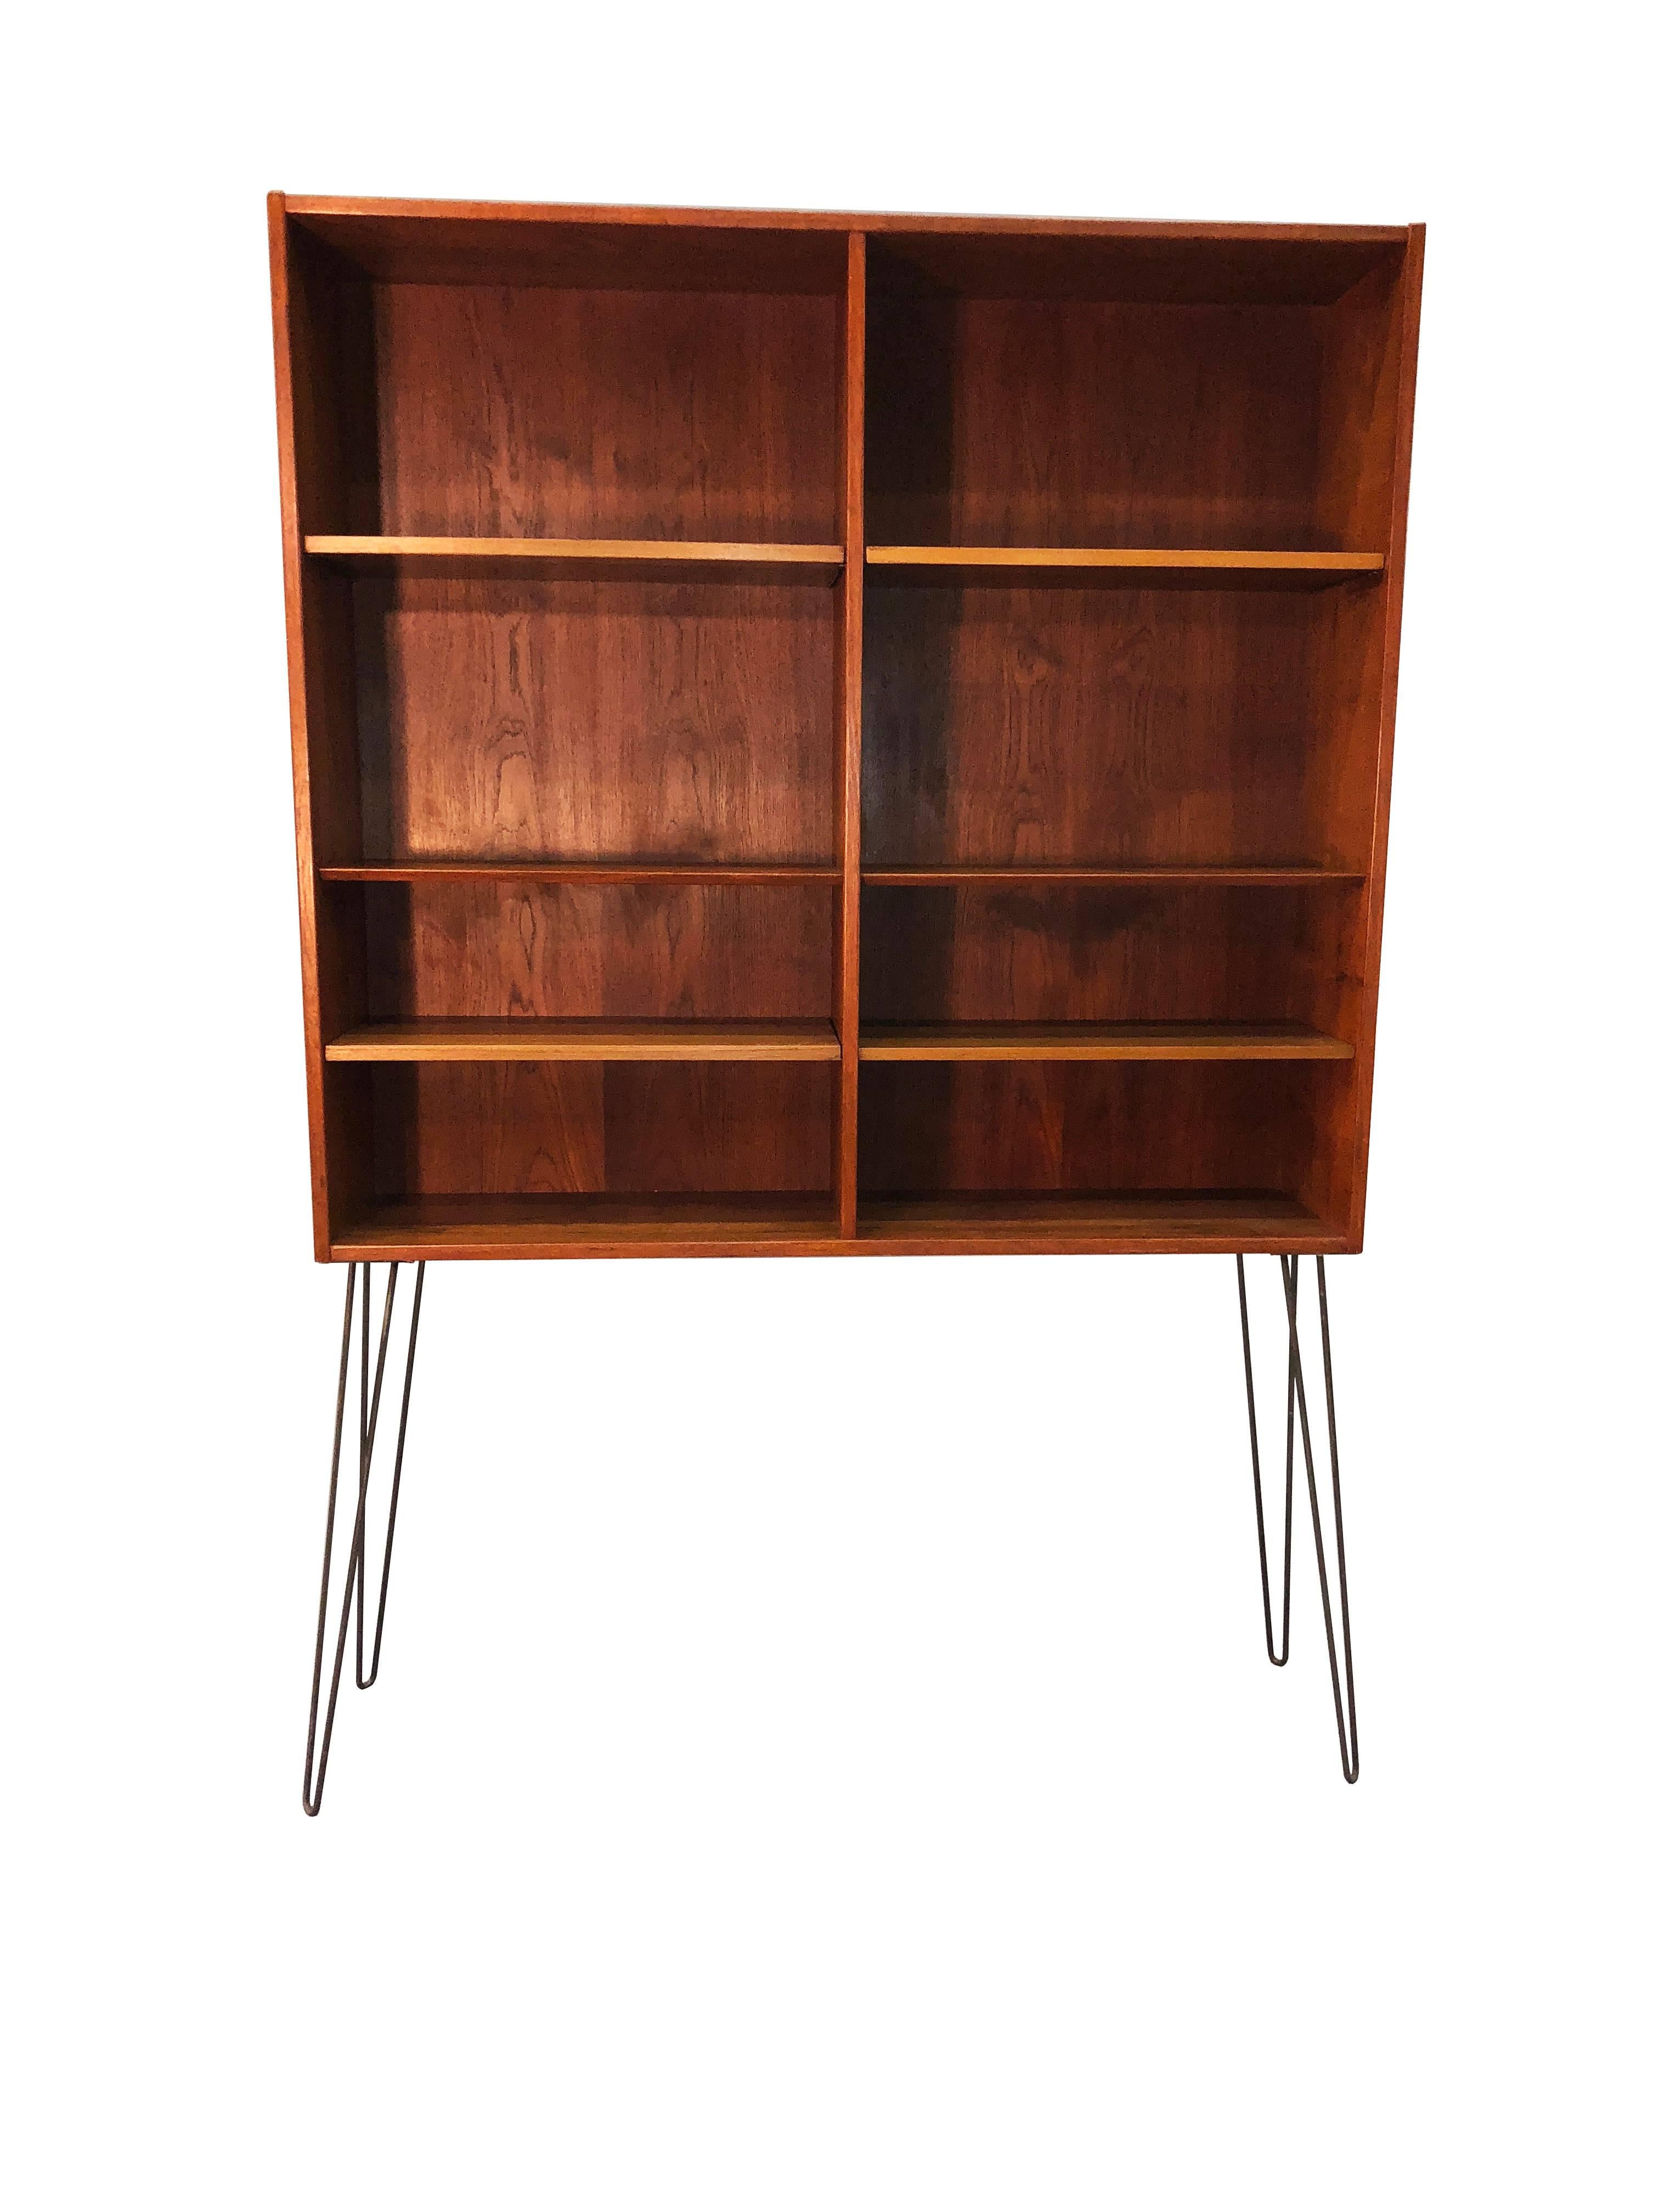 Vintage 1960s tall teak wood bookcase with wrought iron legs. The top and bottom shelves adjust, the middle shelf does not adjust. No maker's mark.